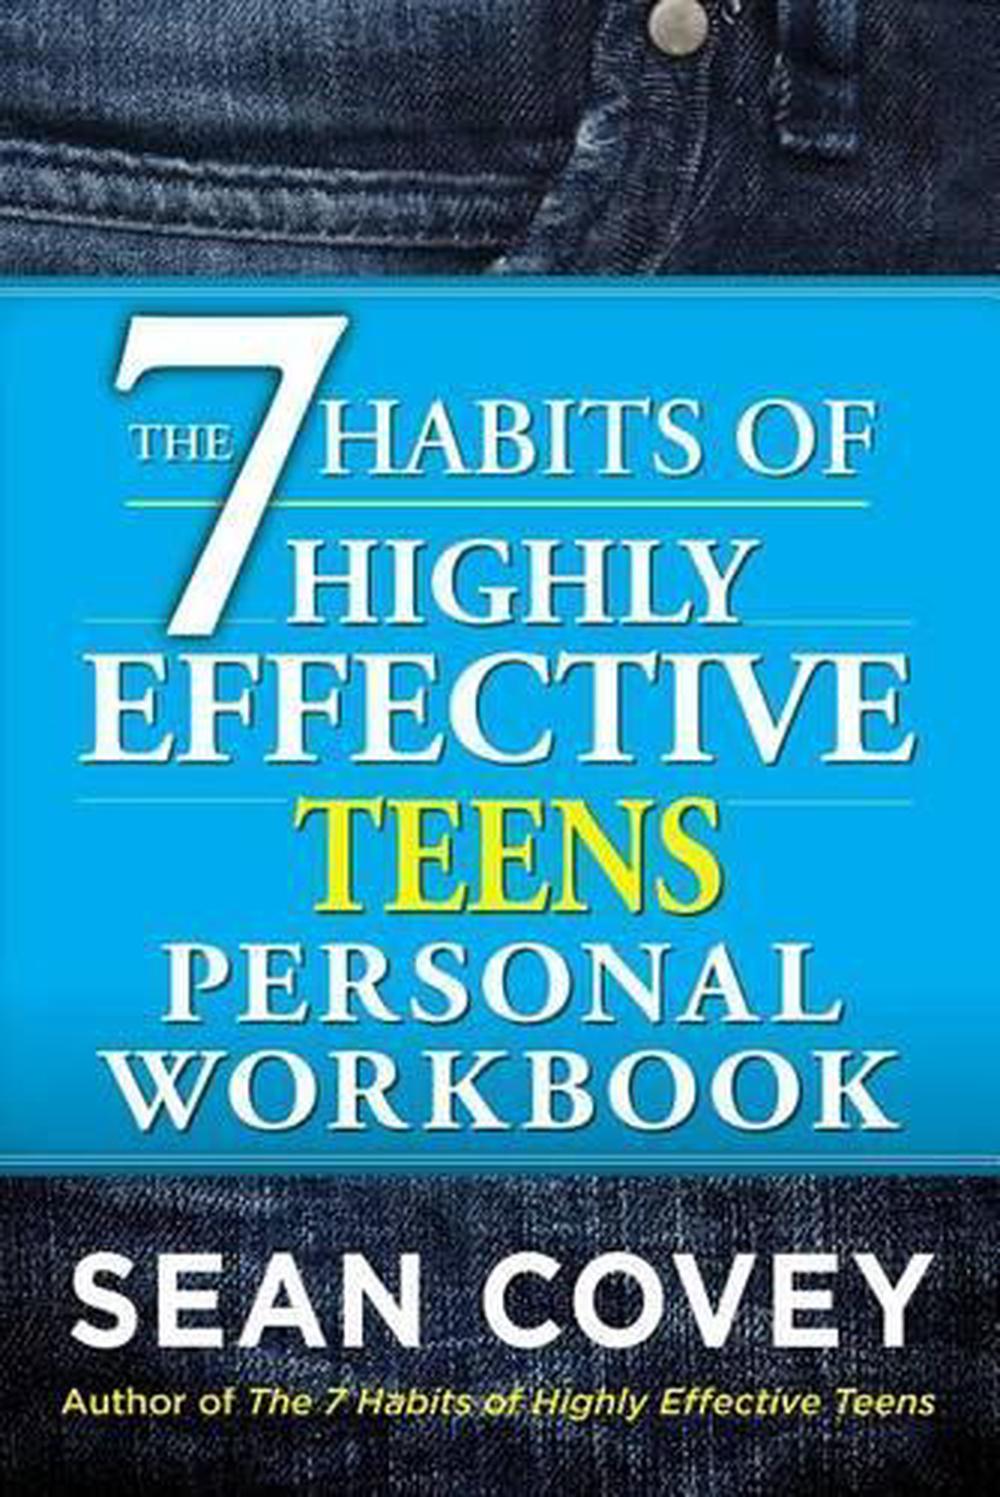 the 7 habits of highly effective teens workbook